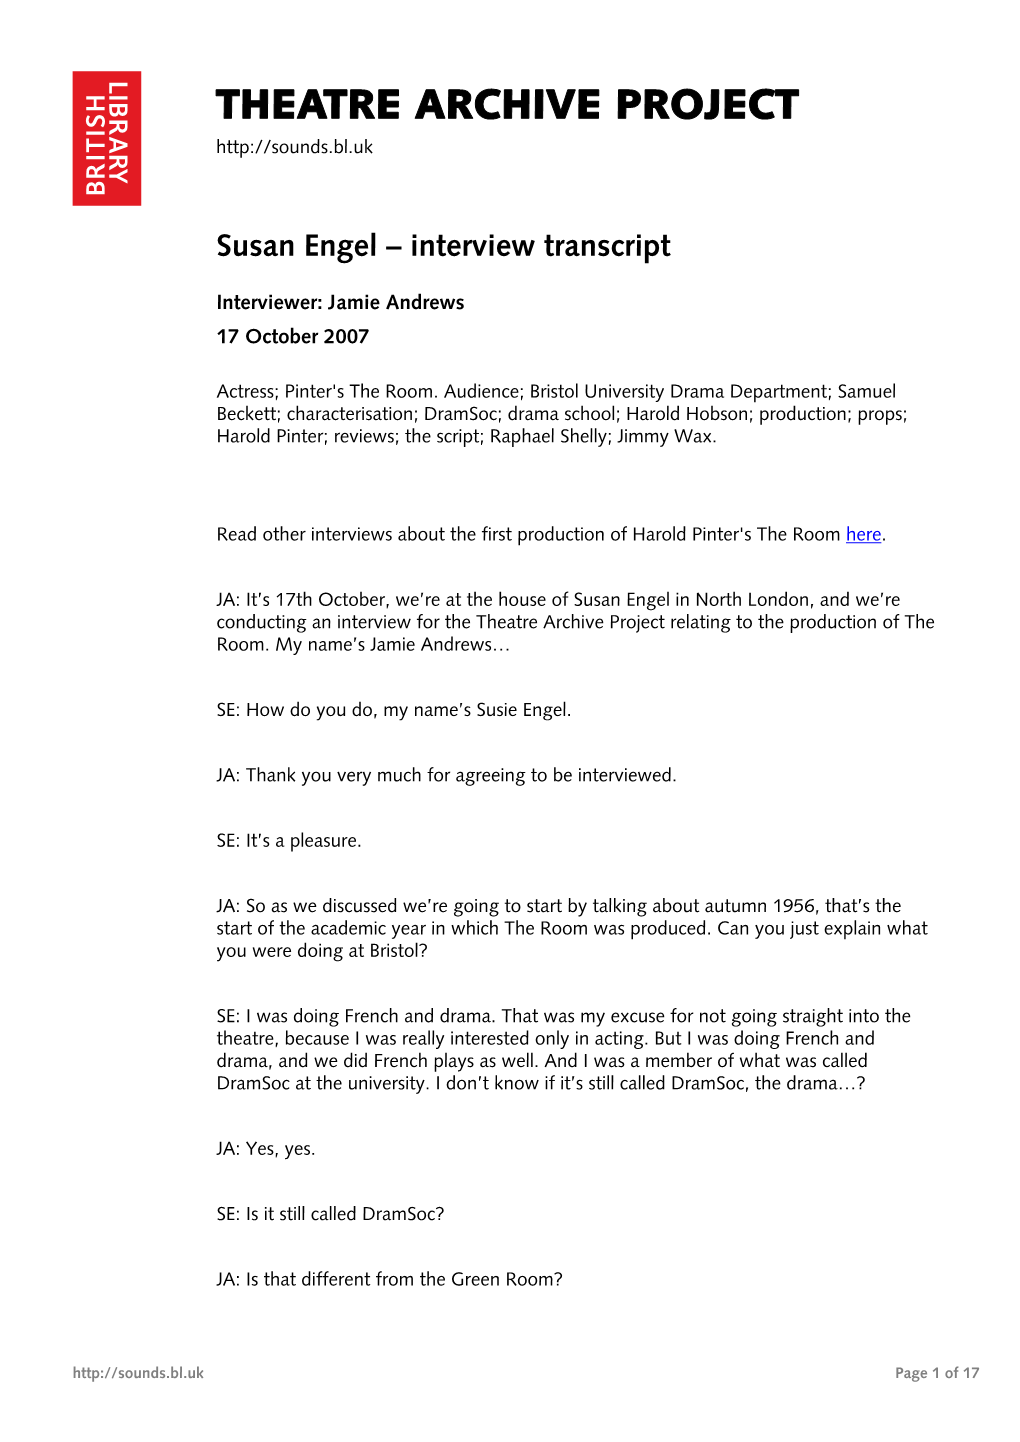 Theatre Archive Project: Interview with Susan Engel